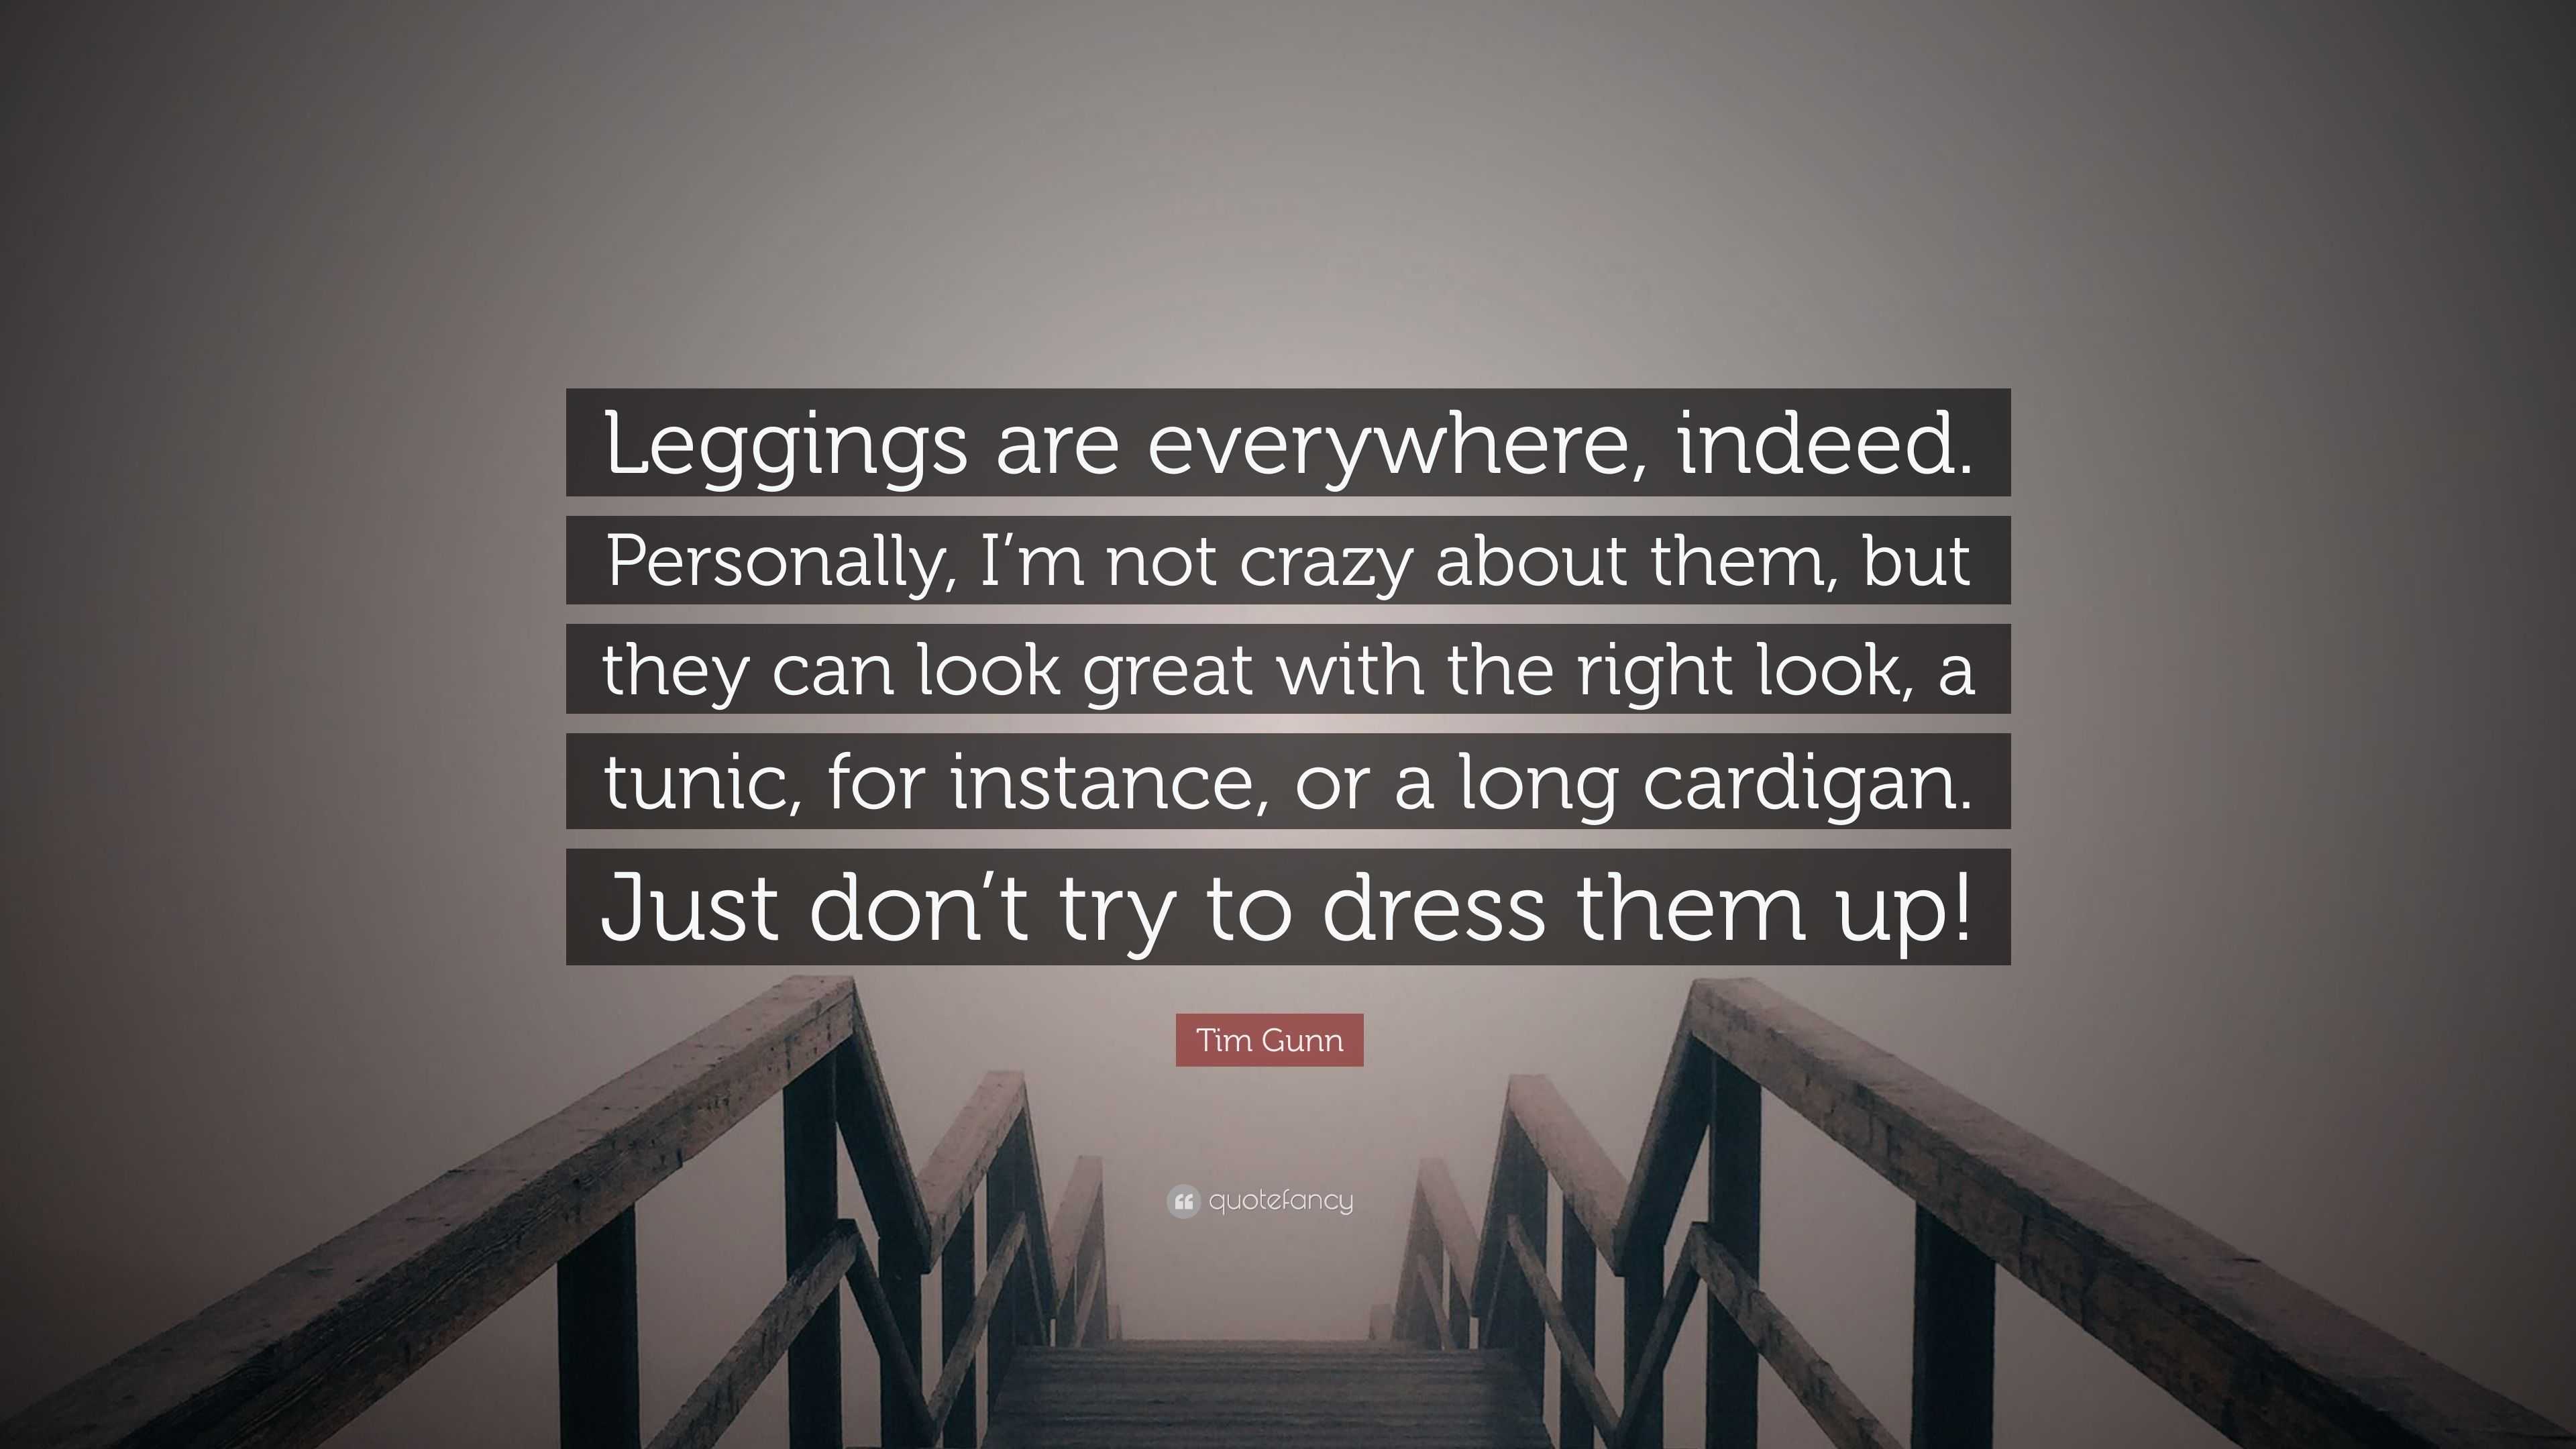 Tim Gunn Quote: “Leggings are everywhere, indeed. Personally, I'm not crazy  about them, but they can look great with the right look, a tu”